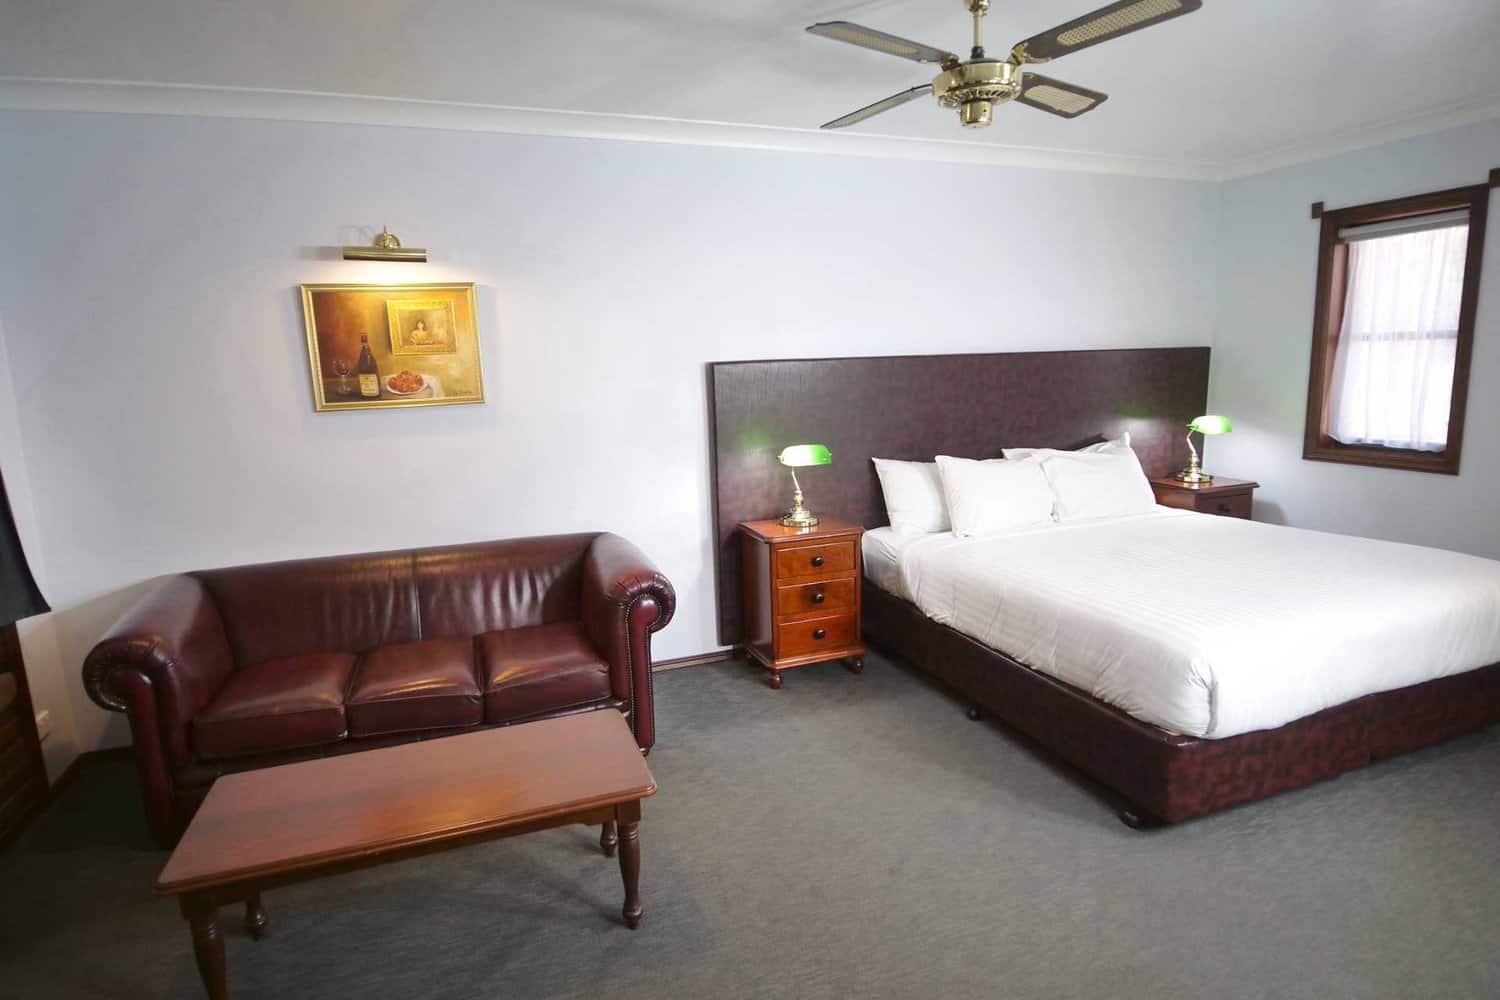 A spacious and inviting hotel room, featuring a large bed with white linens, a leather sofa, a classic wooden coffee table, and a framed painting, all under the soft glow of green-shaded bedside lamps.